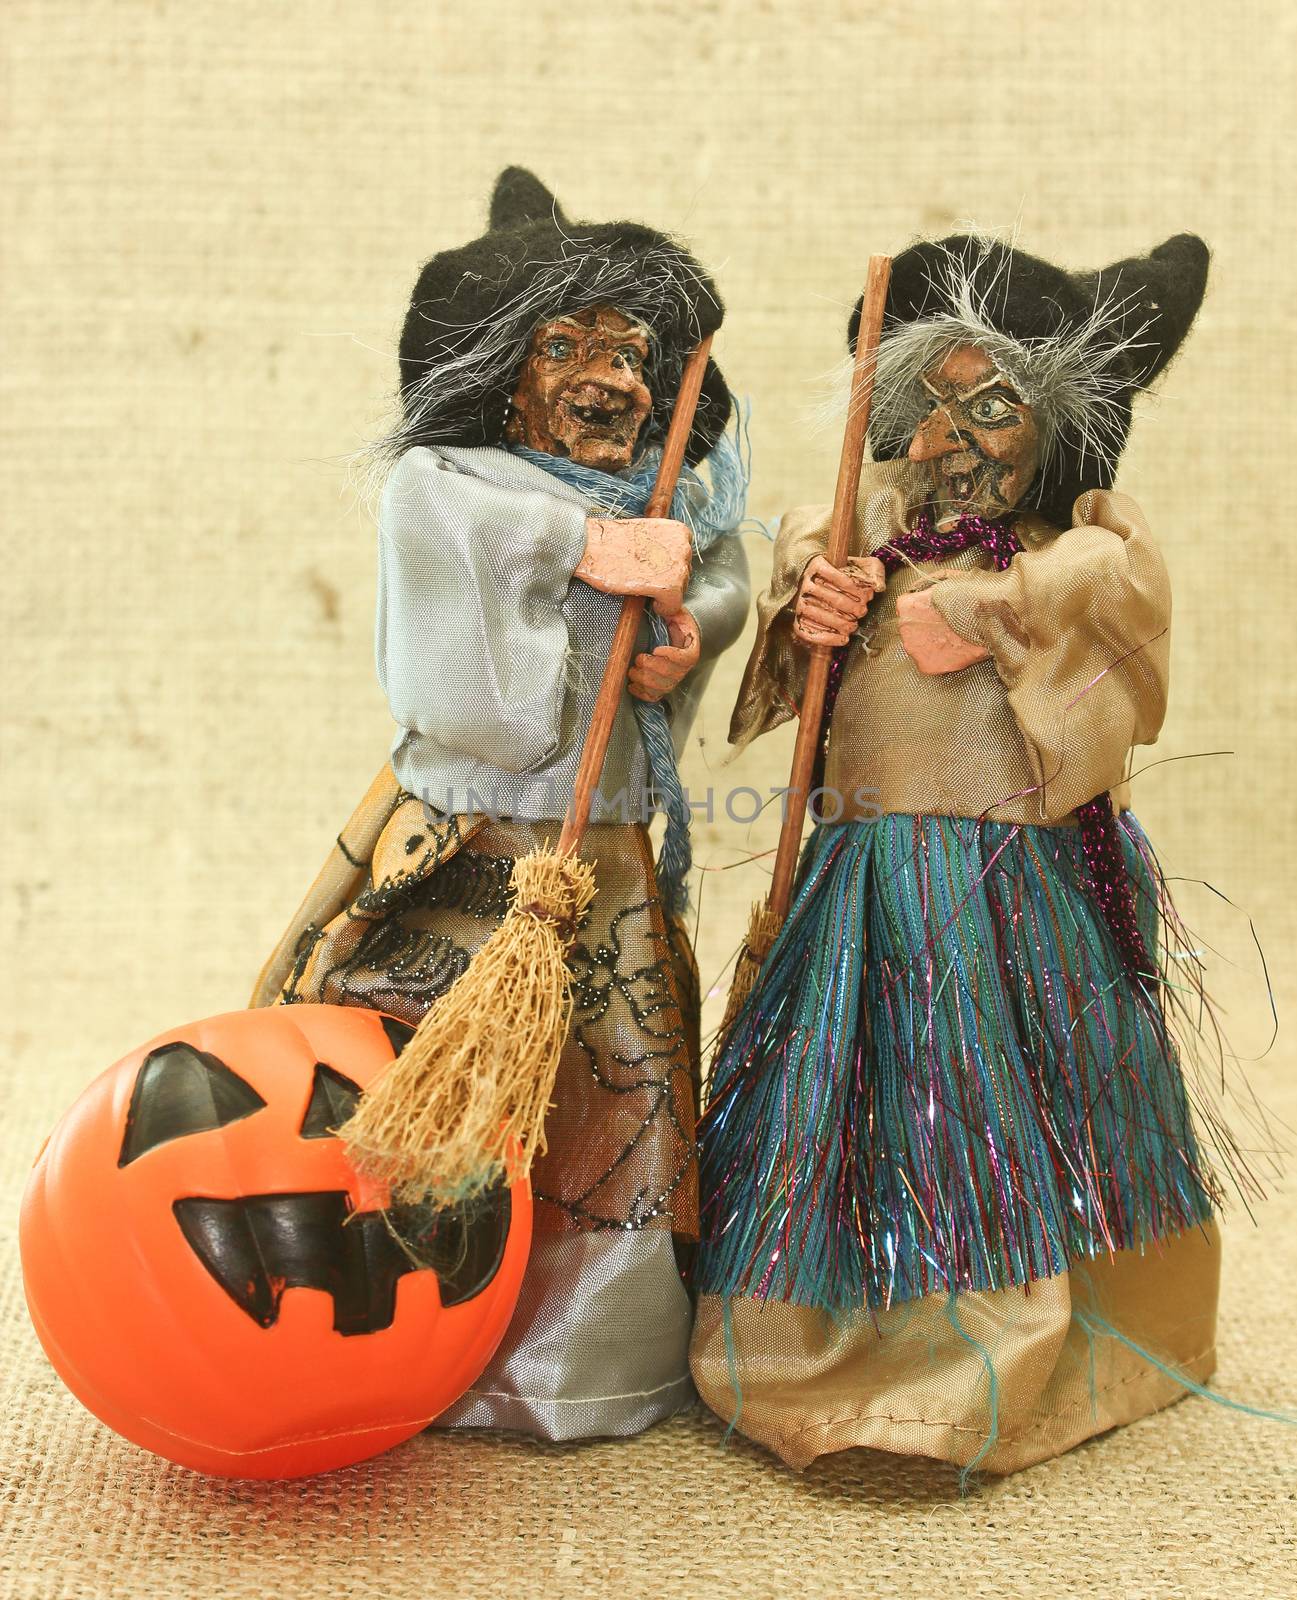 Halloween Creepy Ugly Witches and Jack Lantern Pumpkin by BassemAdel